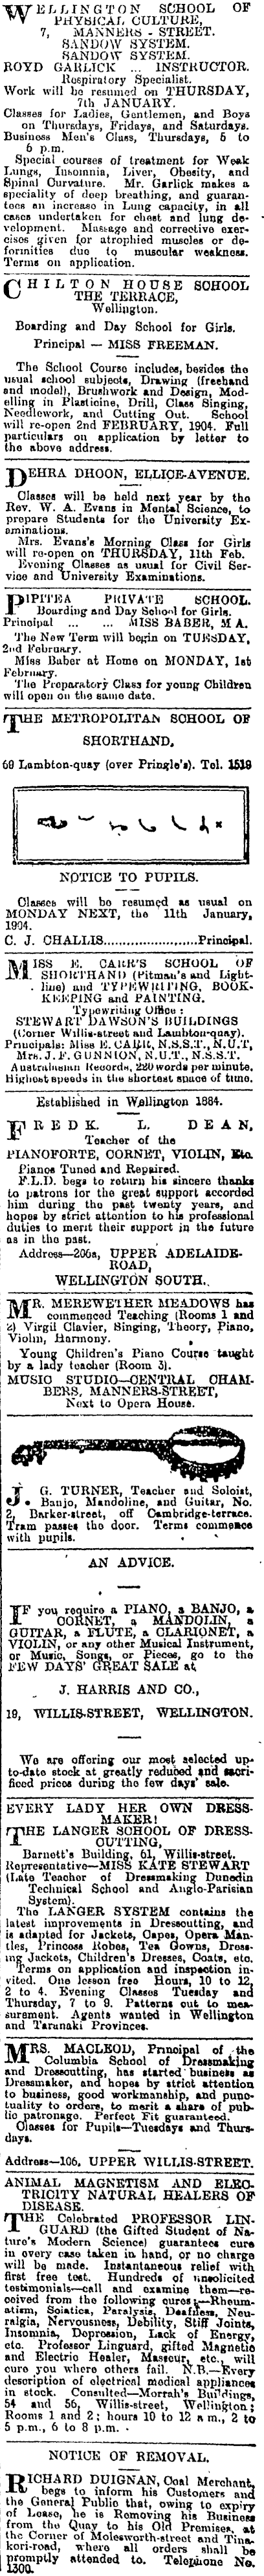 Papers Past Newspapers Evening Post 8 January 1904 Page 2 Advertisements Column 6